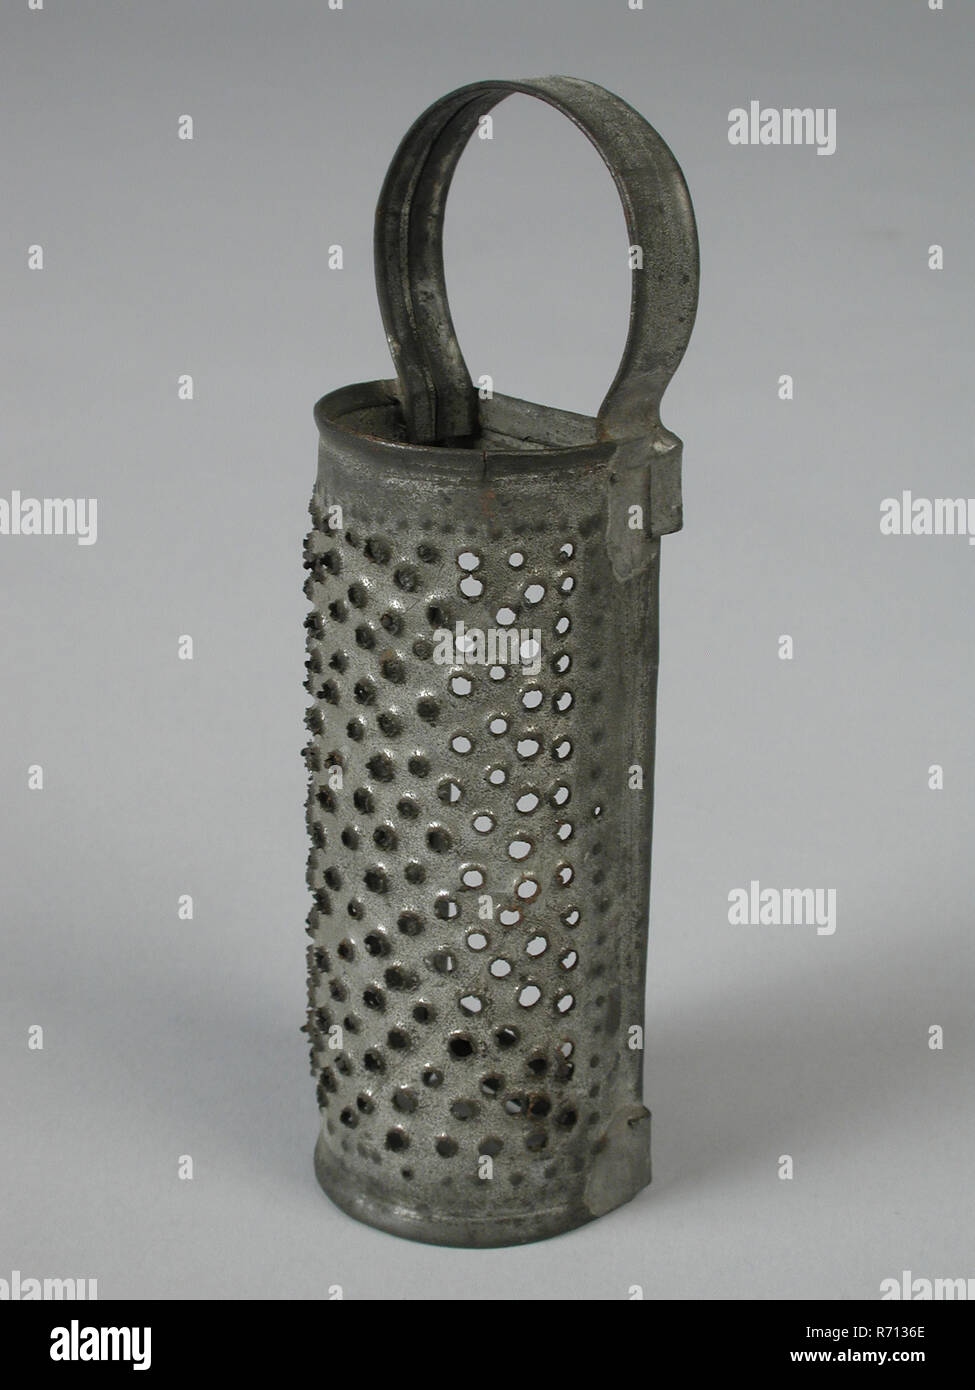 https://c8.alamy.com/comp/R7136E/metal-worker-gresnich-cans-miniature-grater-rasp-kitchenware-miniature-toy-relaxant-model-metal-curved-soldered-tinned-tin-elongated-round-bent-perforated-half-cylinder-with-rough-holes-bottom-at-two-places-transversely-connected-relatively-large-hold-1868-sibilla-van-embden-play-grating-food-prepare-kitchen-R7136E.jpg